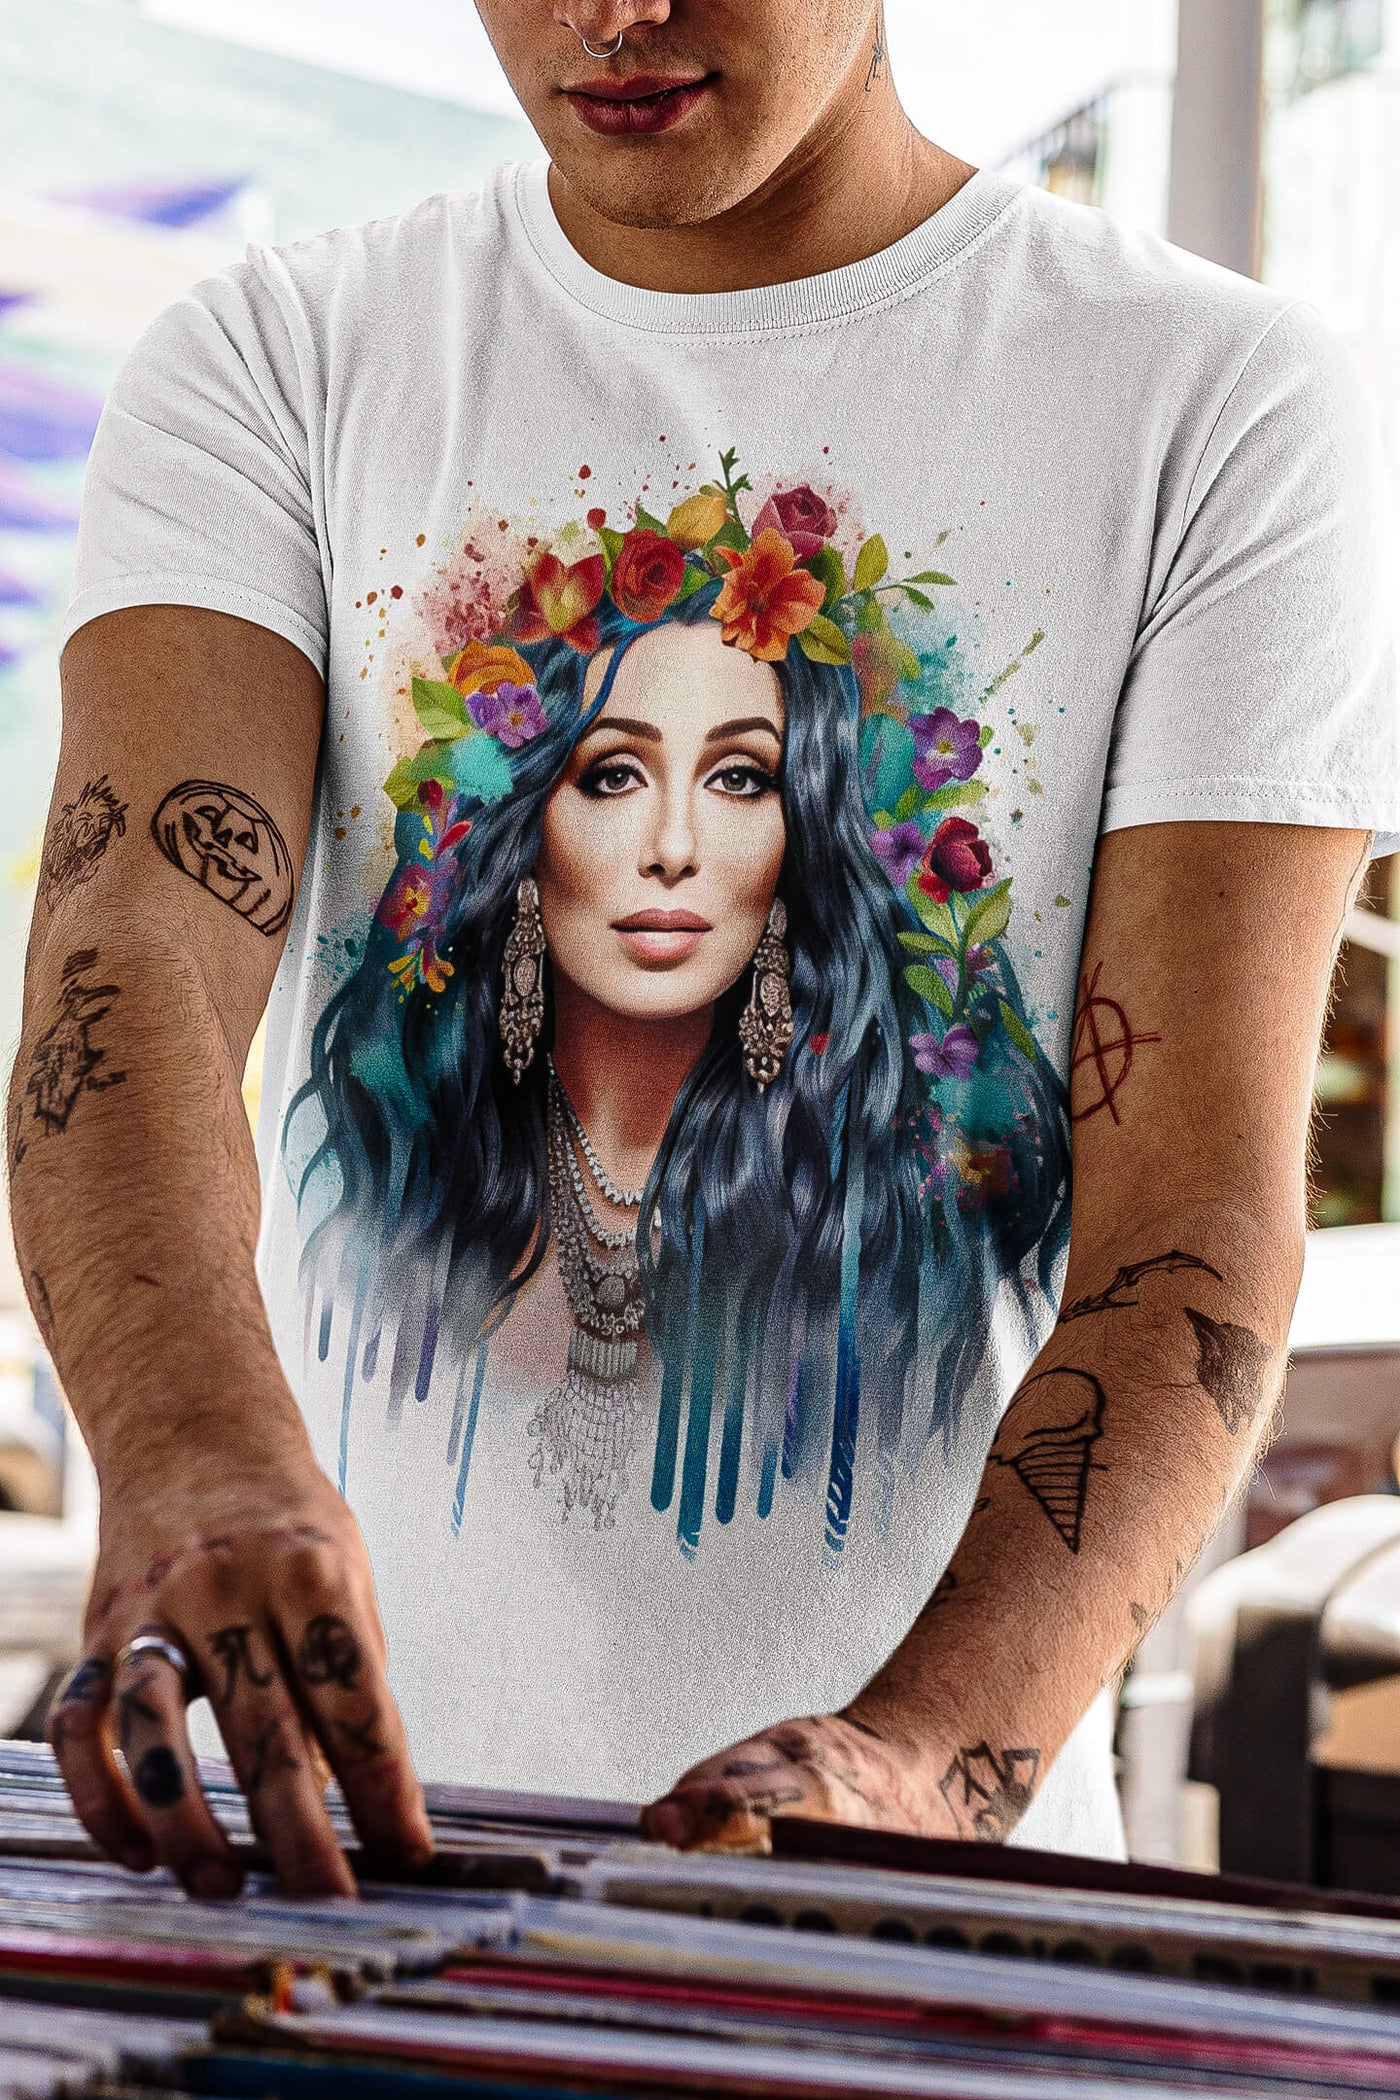 Tattooed young man at a music store wearing Gllamazon's Cher-ry Blossom Cher T-shirt. Color: White.